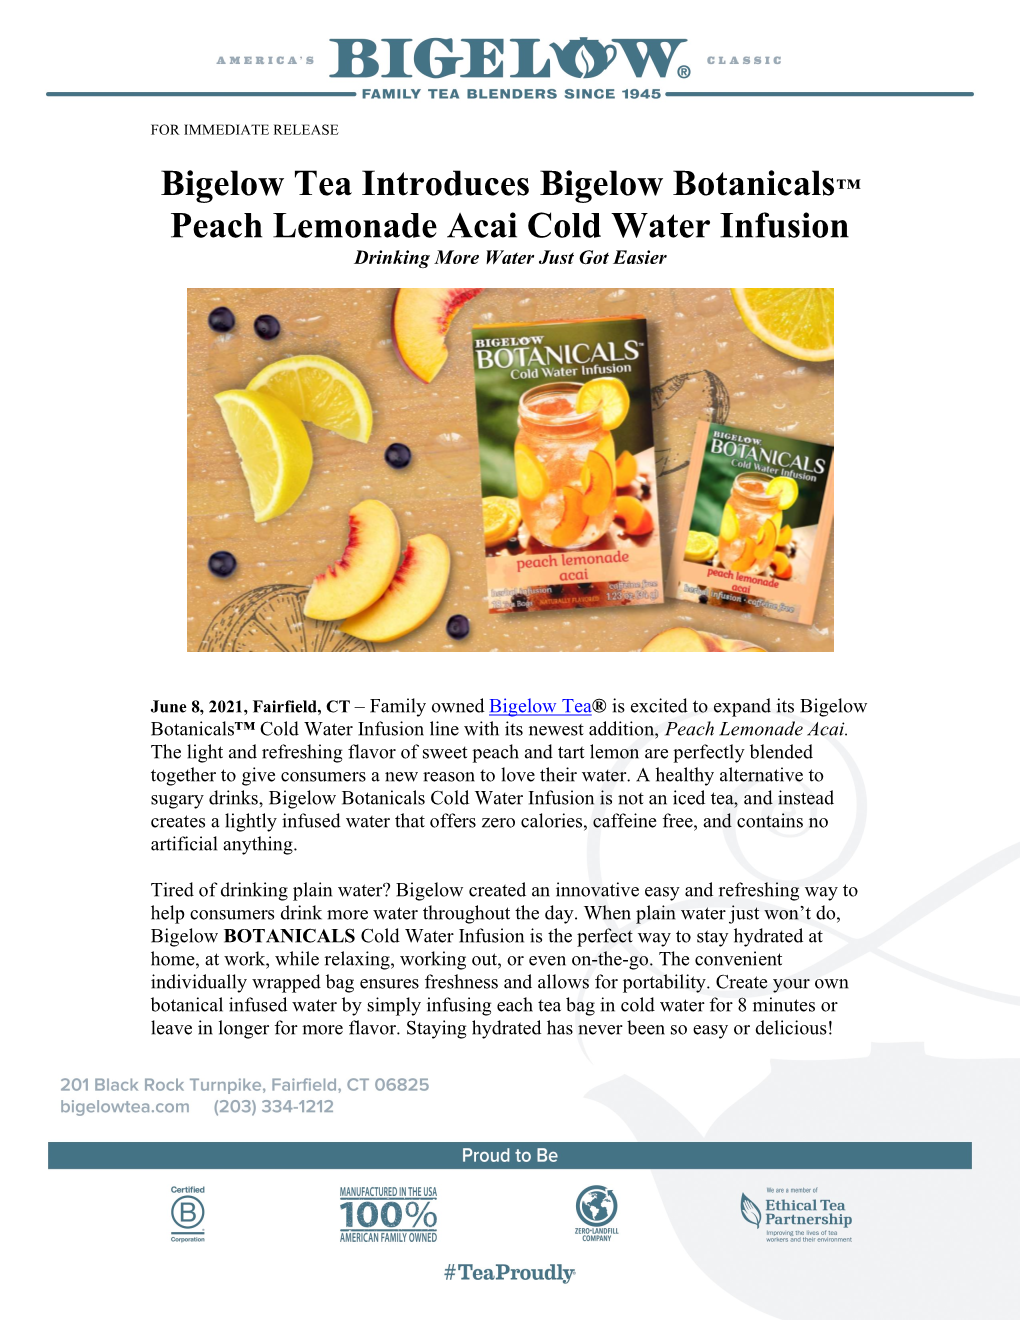 Bigelow Tea Introduces Bigelow Botanicals™ Peach Lemonade Acai Cold Water Infusion Drinking More Water Just Got Easier